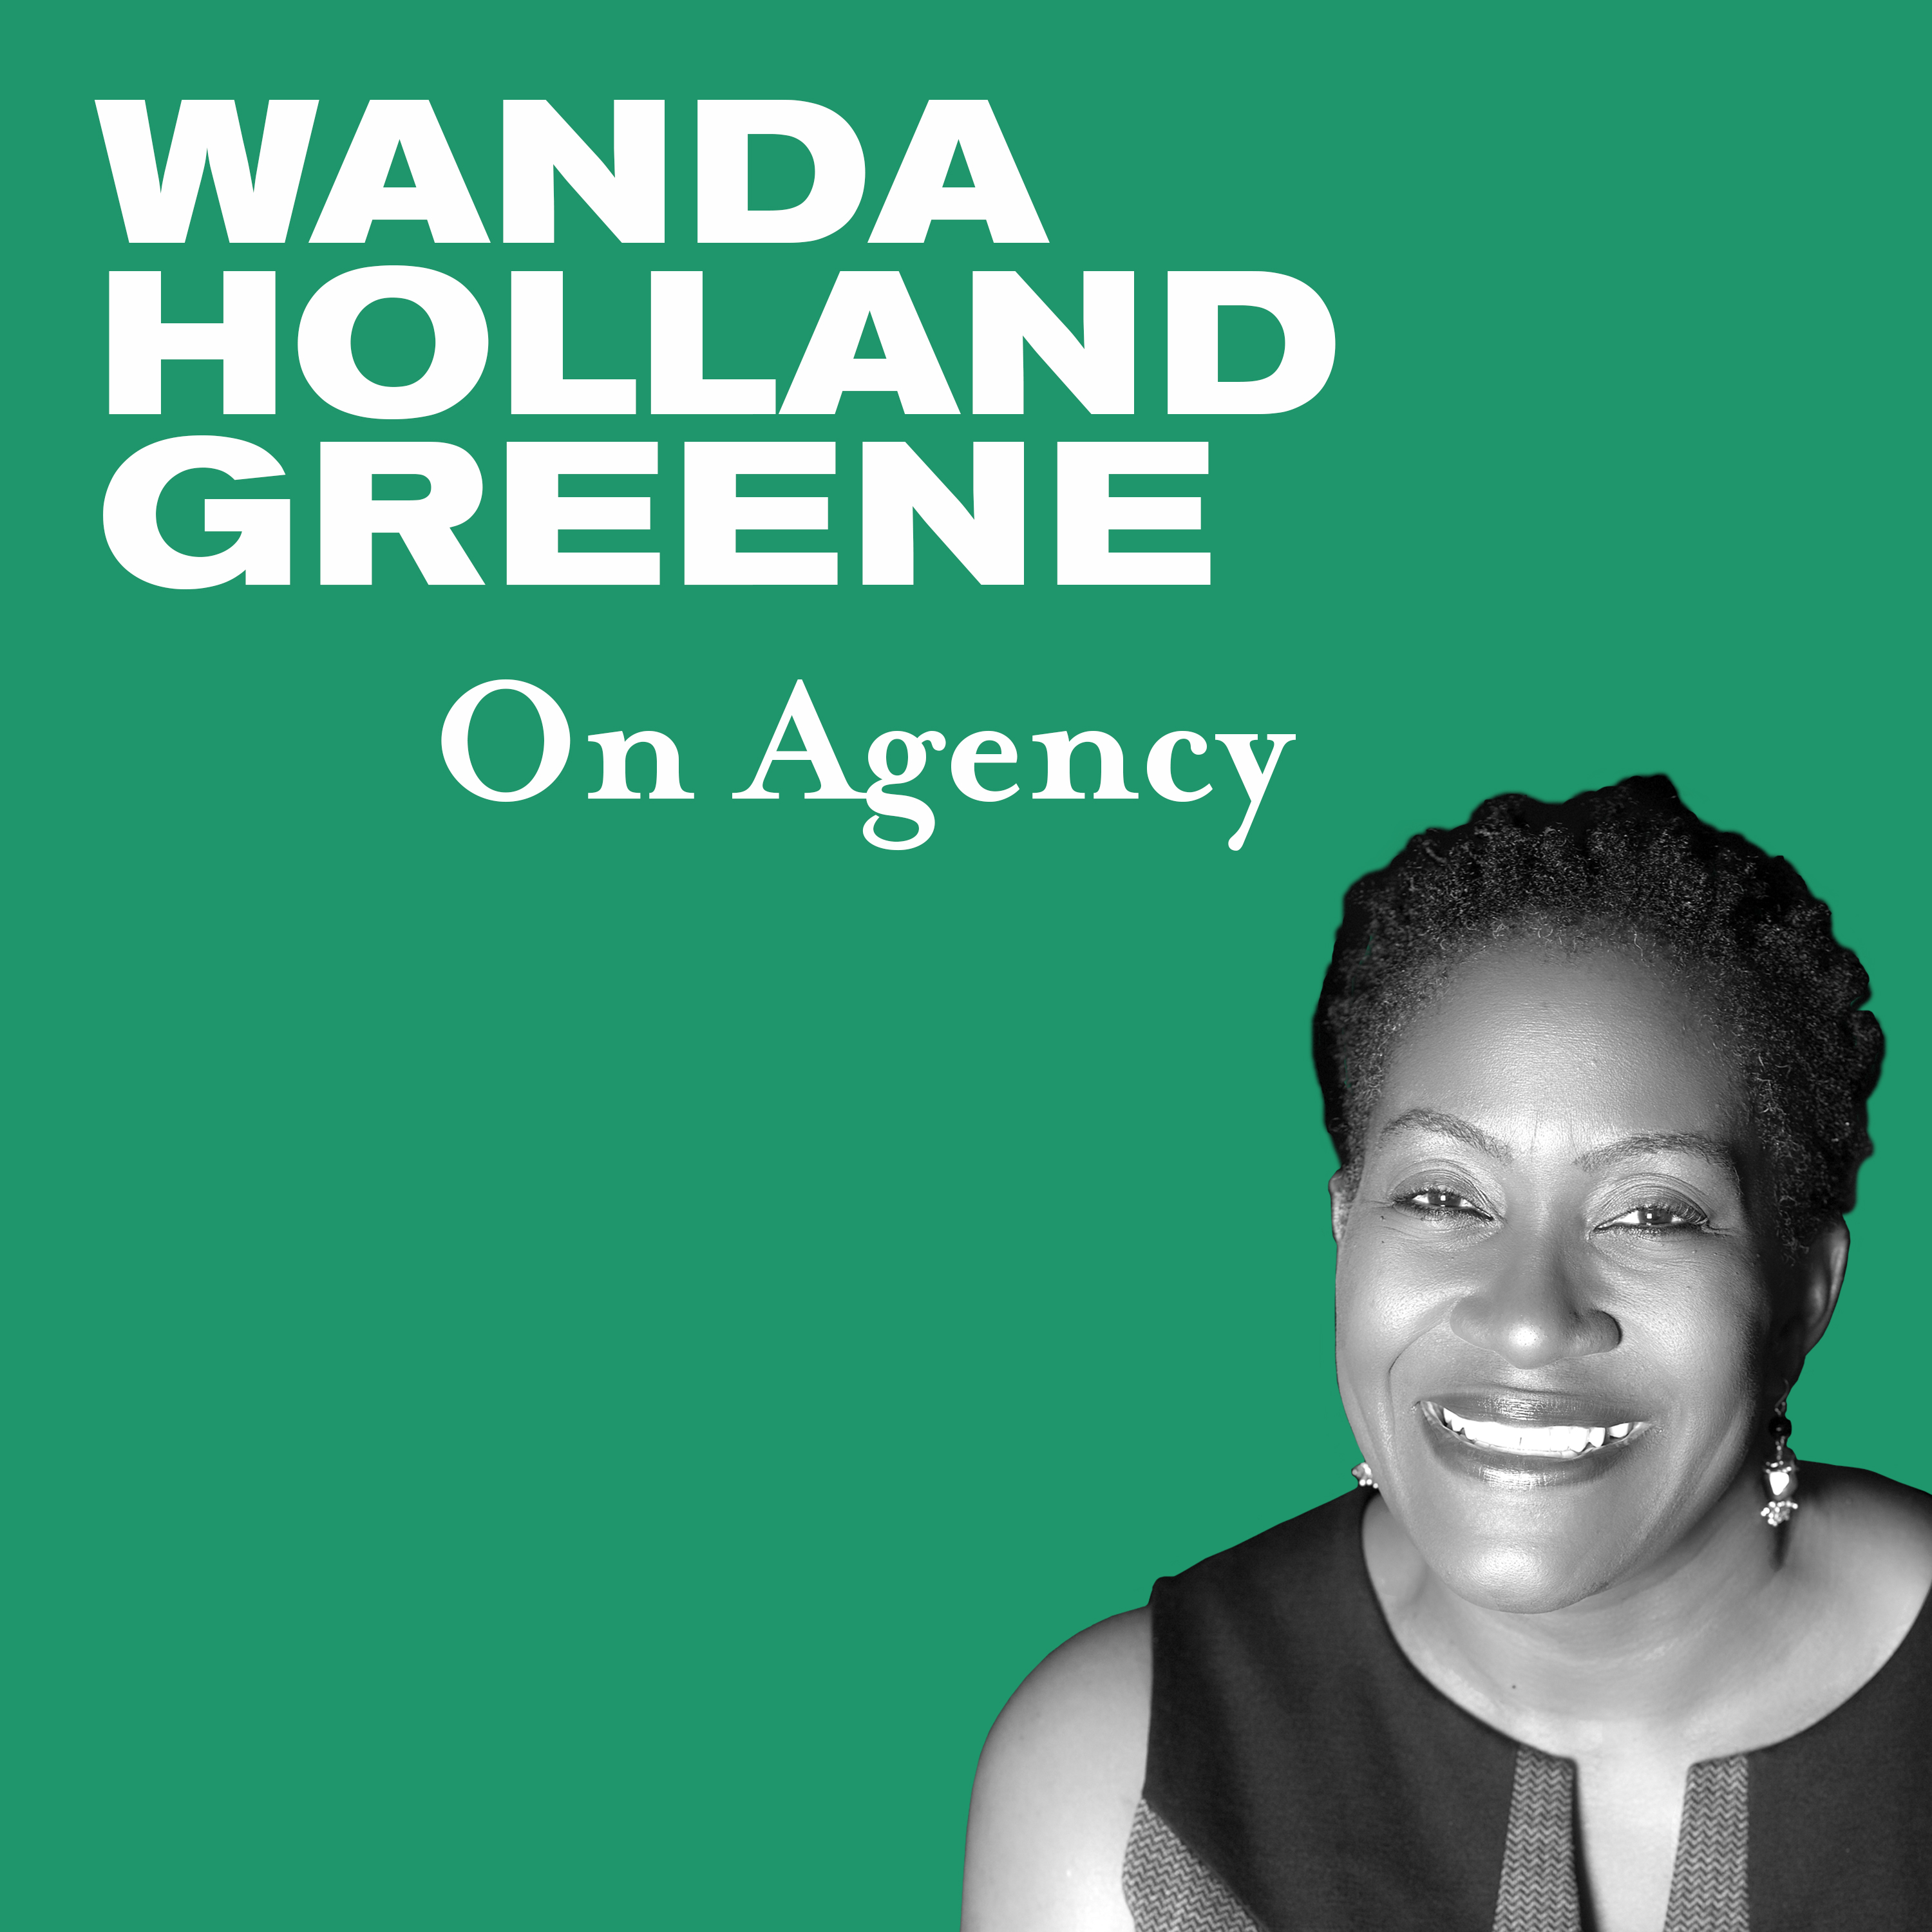 Recognizing Our Agency with Wanda Holland Greene